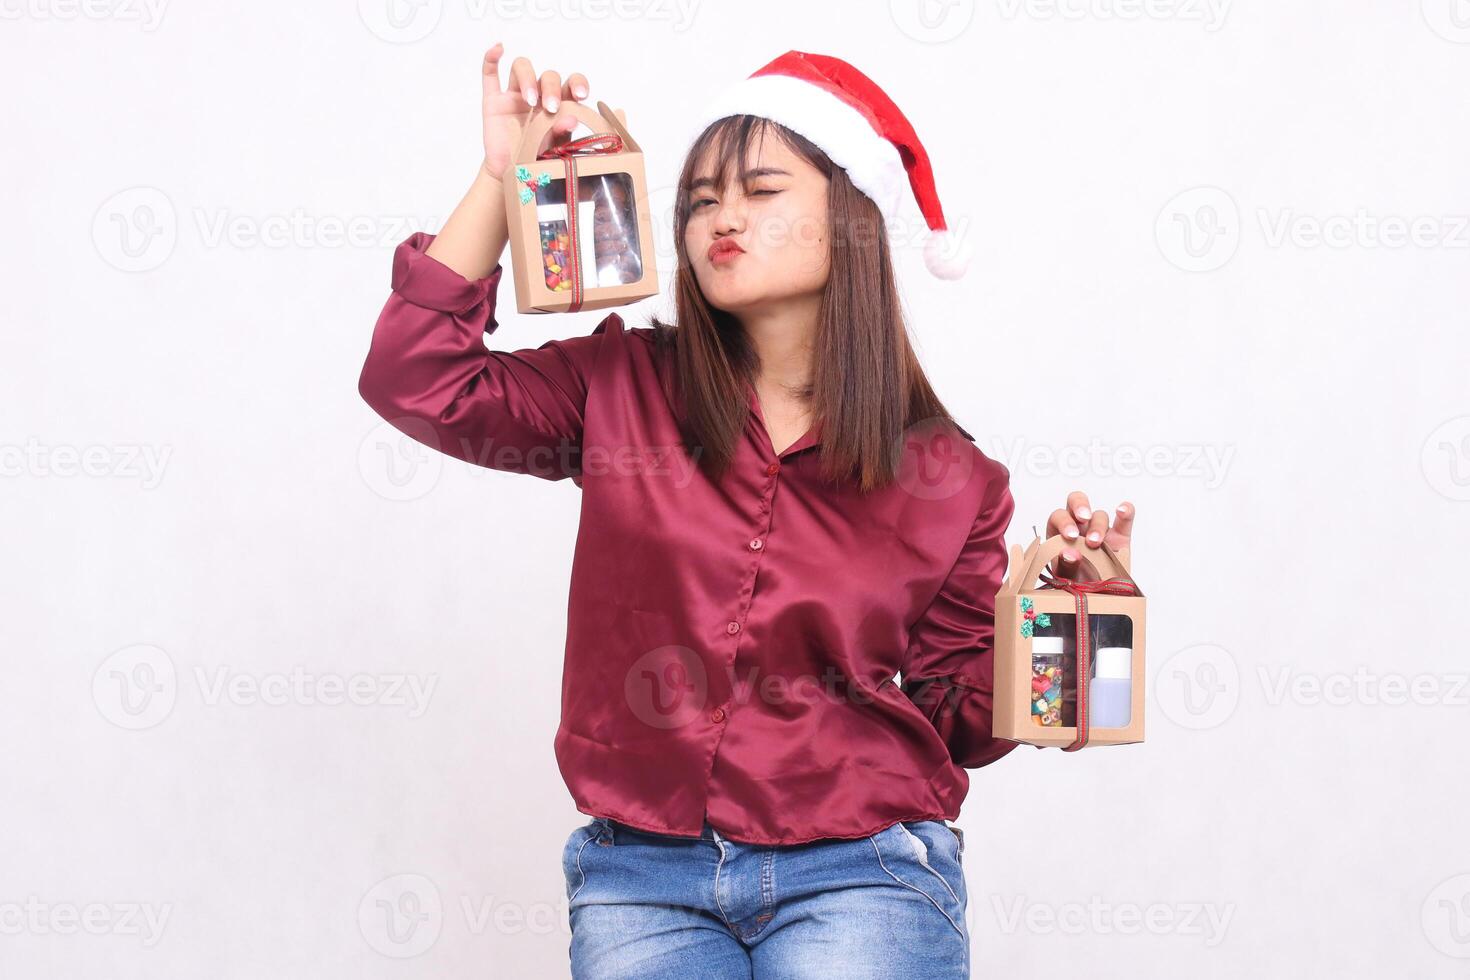 Beautiful young Southeast Asian woman kissing gifts carrying 2 boxes of gift hampers at Christmas wearing Santa Claus hat modern red shirt outfit white background for promotion and advertising photo